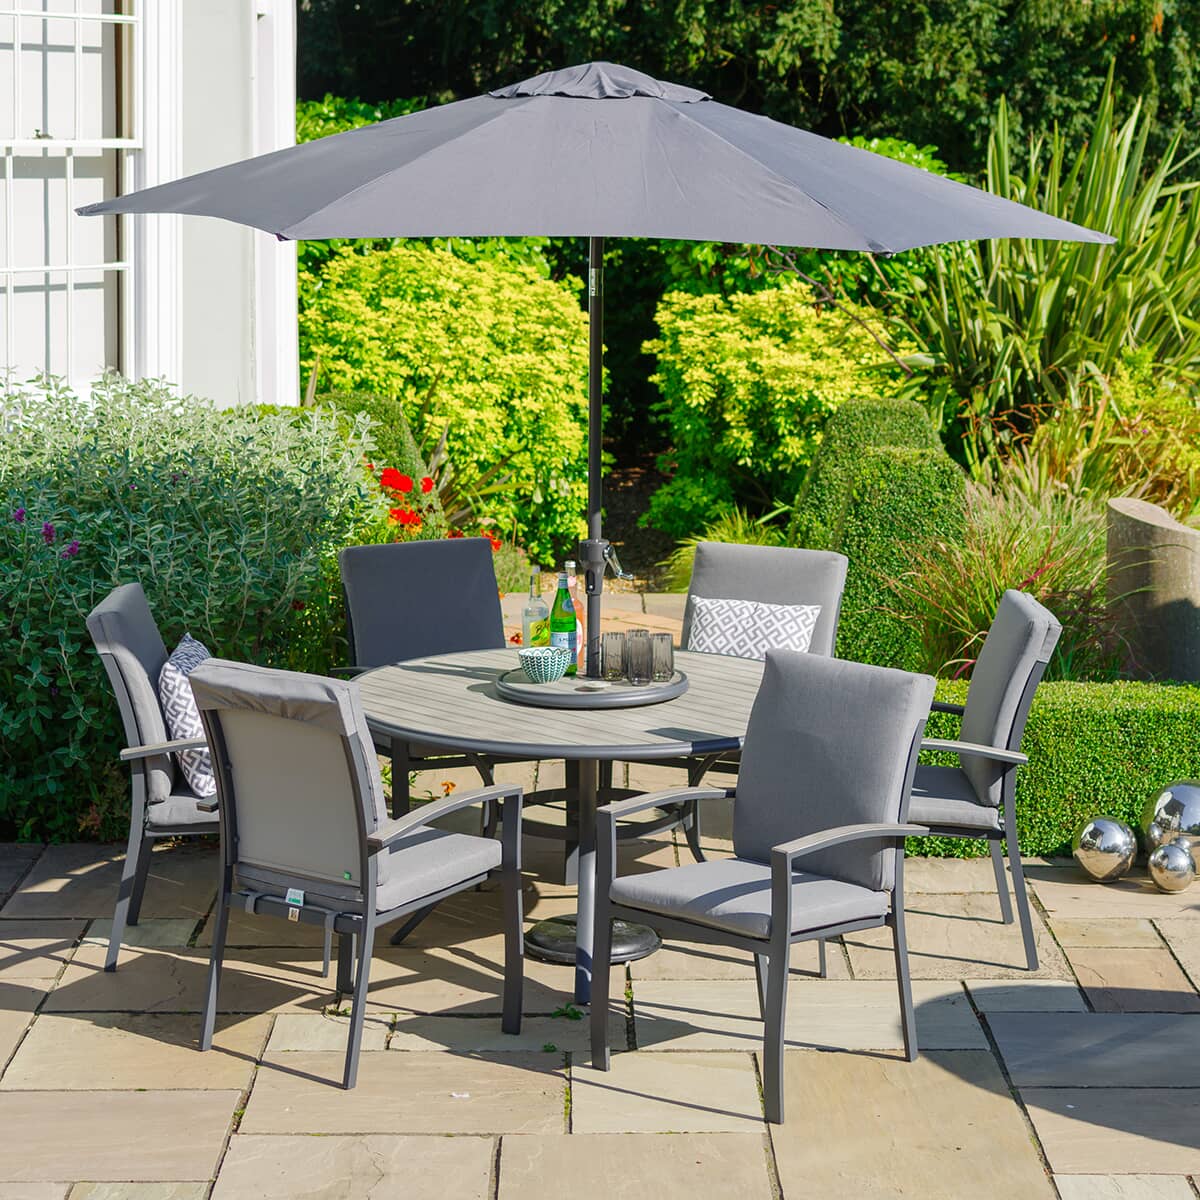 LG Outdoor Turin 6 Seat Dining Set with Lazy Susan and Parasol and Base